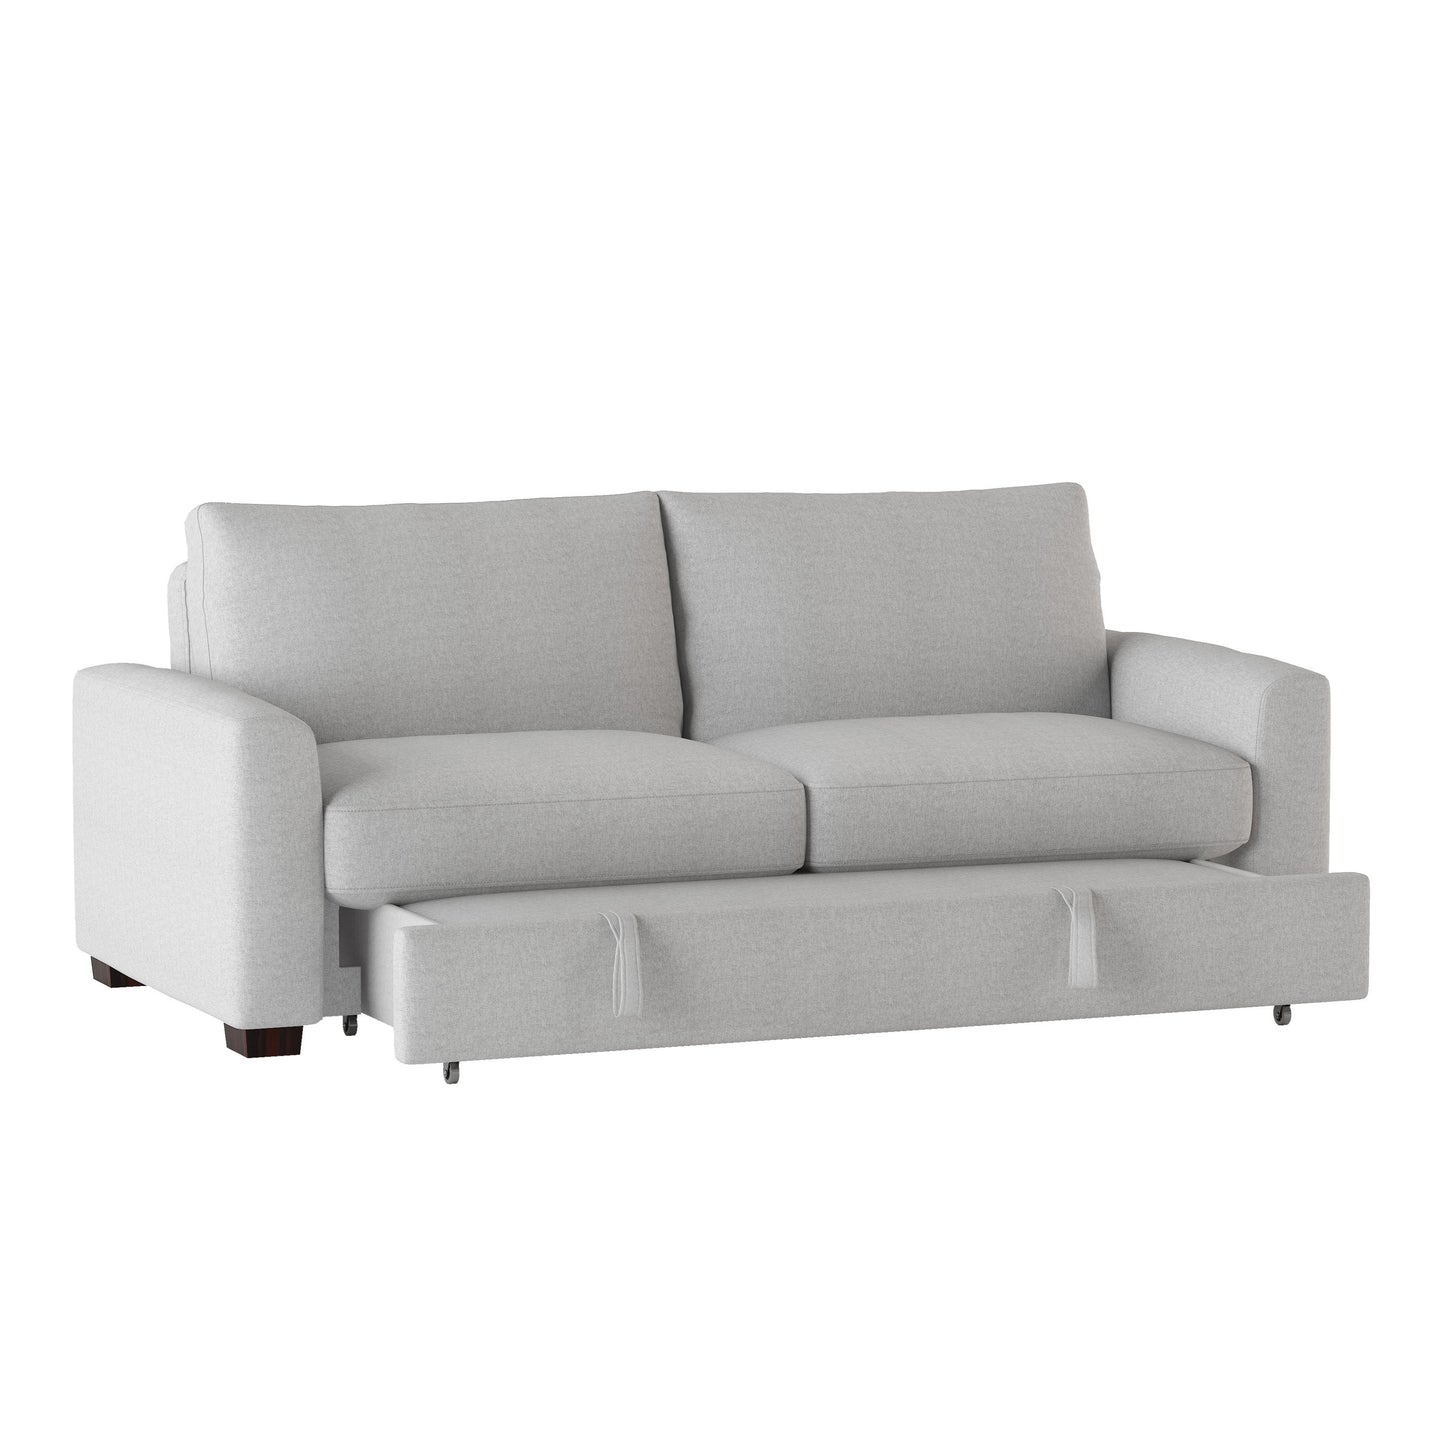 Price Gray Convertible Studio Sofa with Pull-out Bed